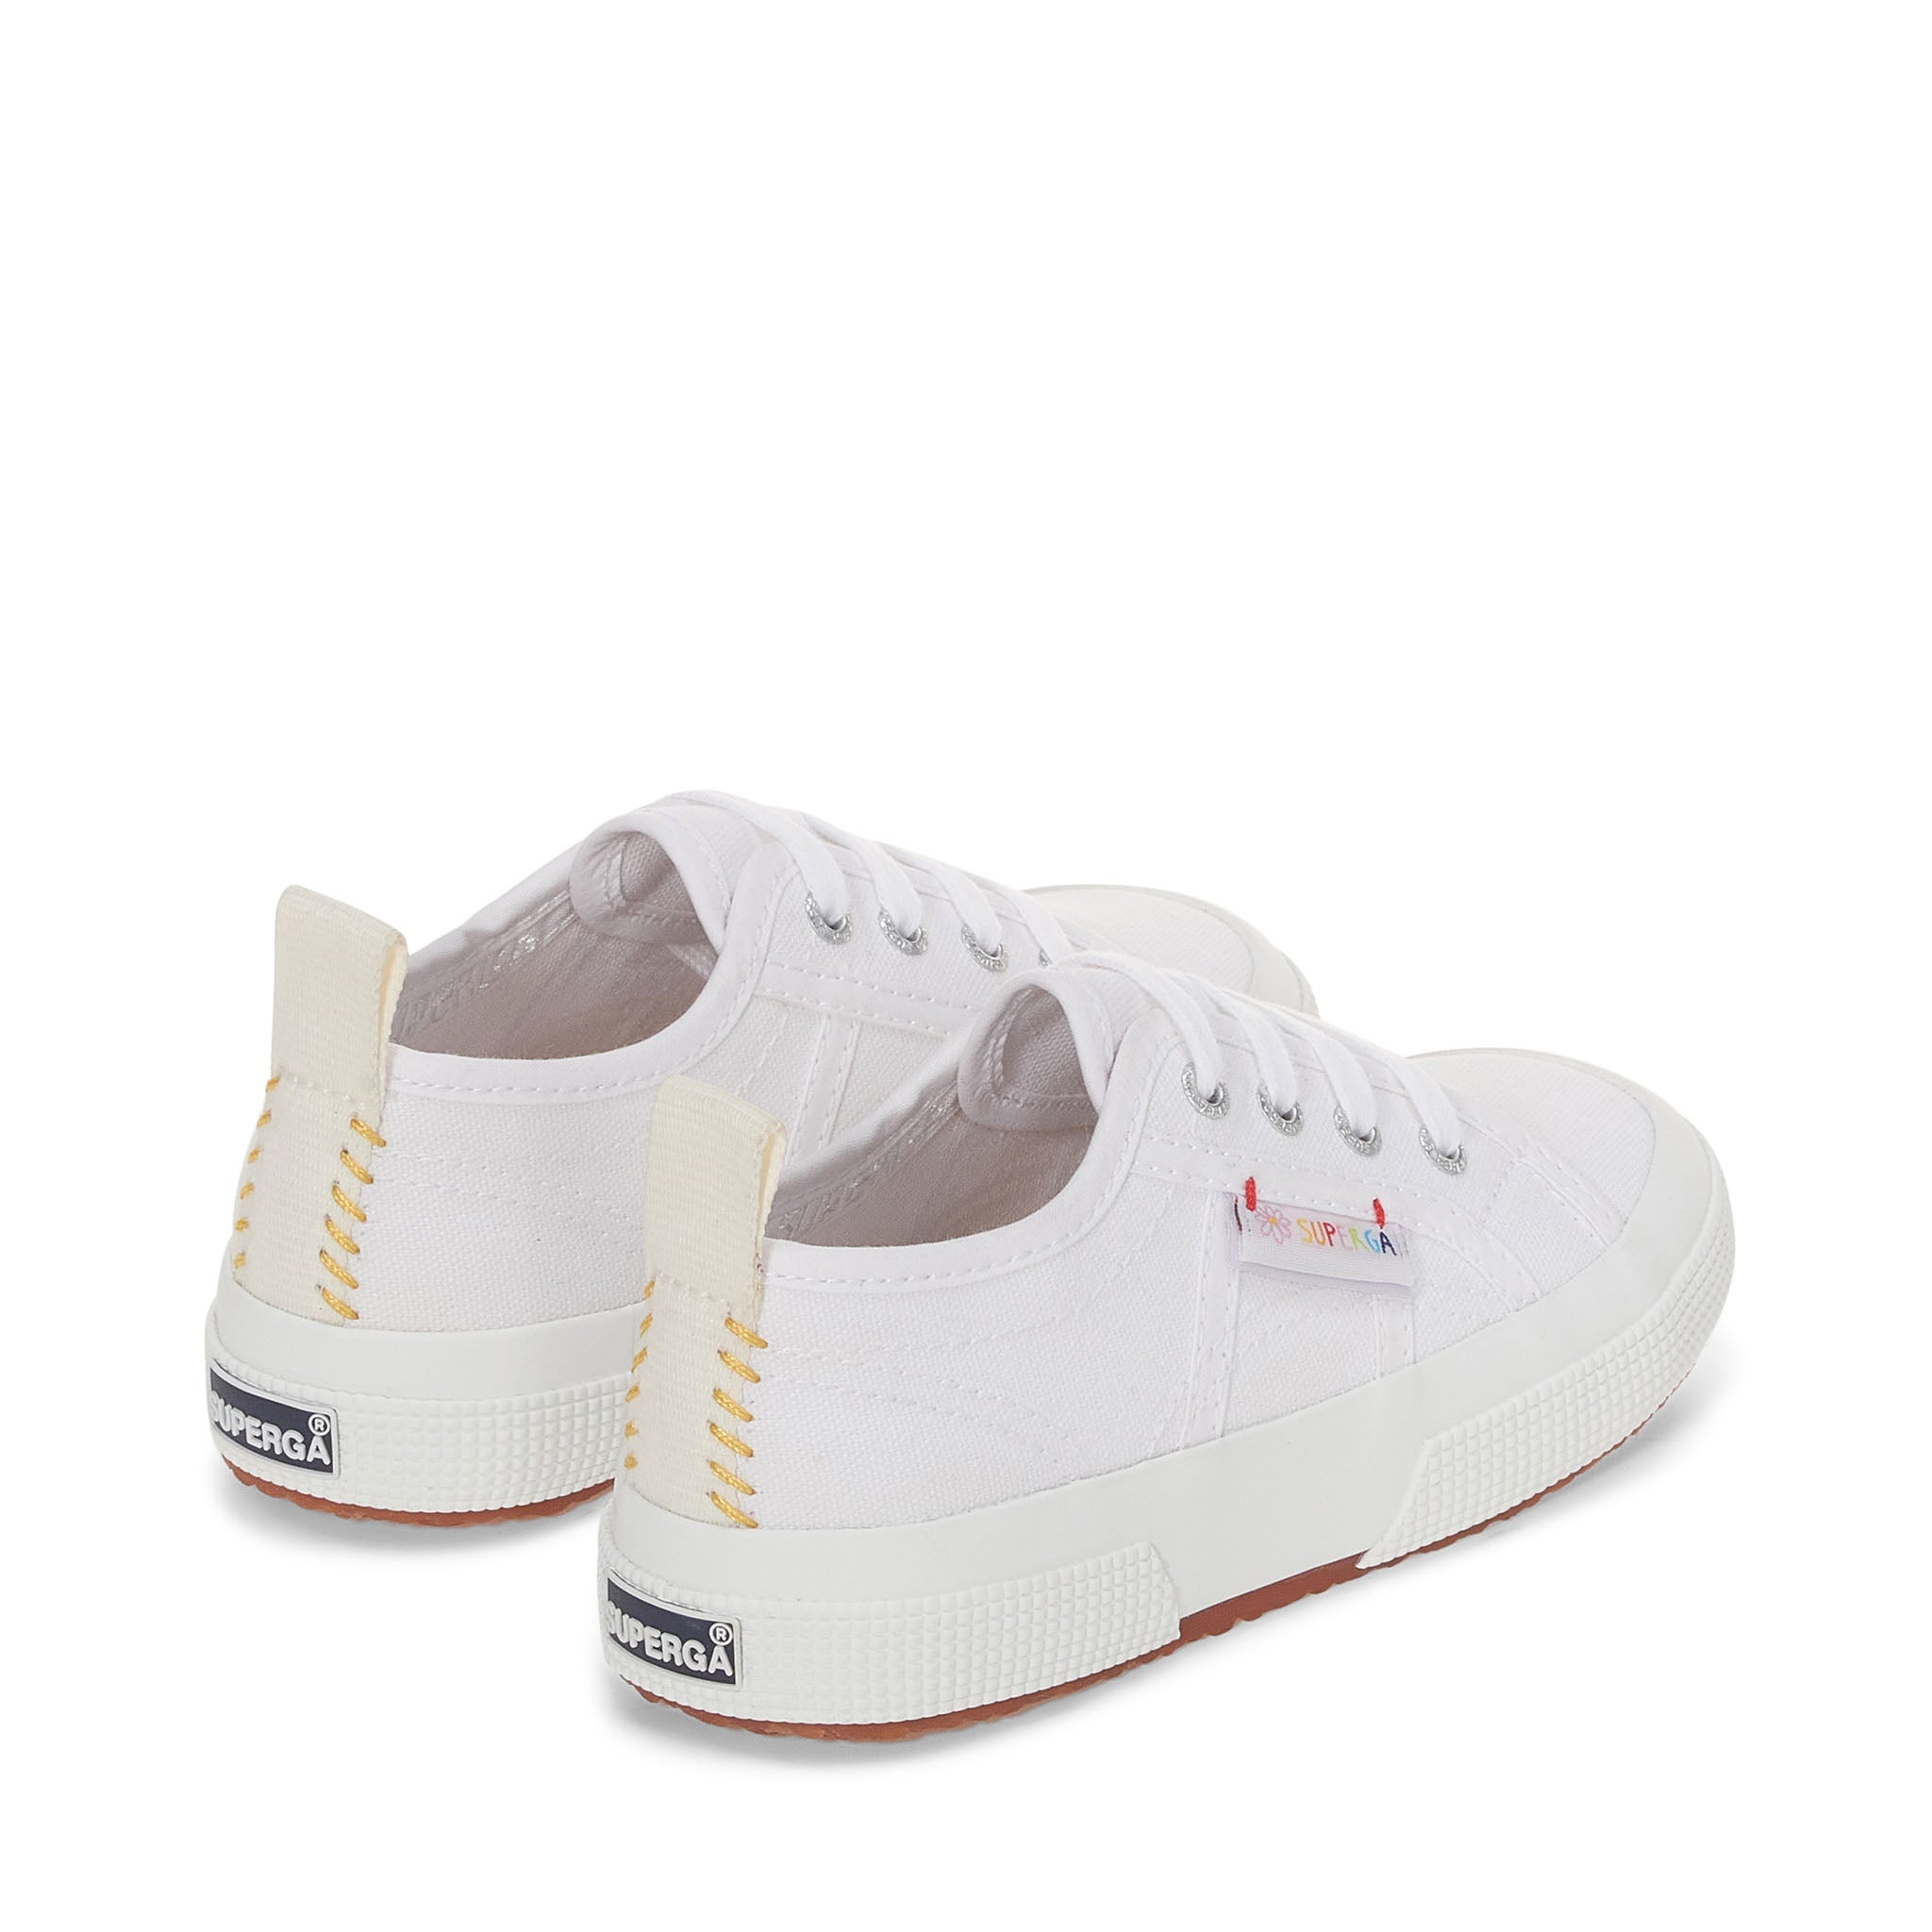 Superga 2750 Kids Funny Label Sneakers - White Multicolor Flower Label. Back view